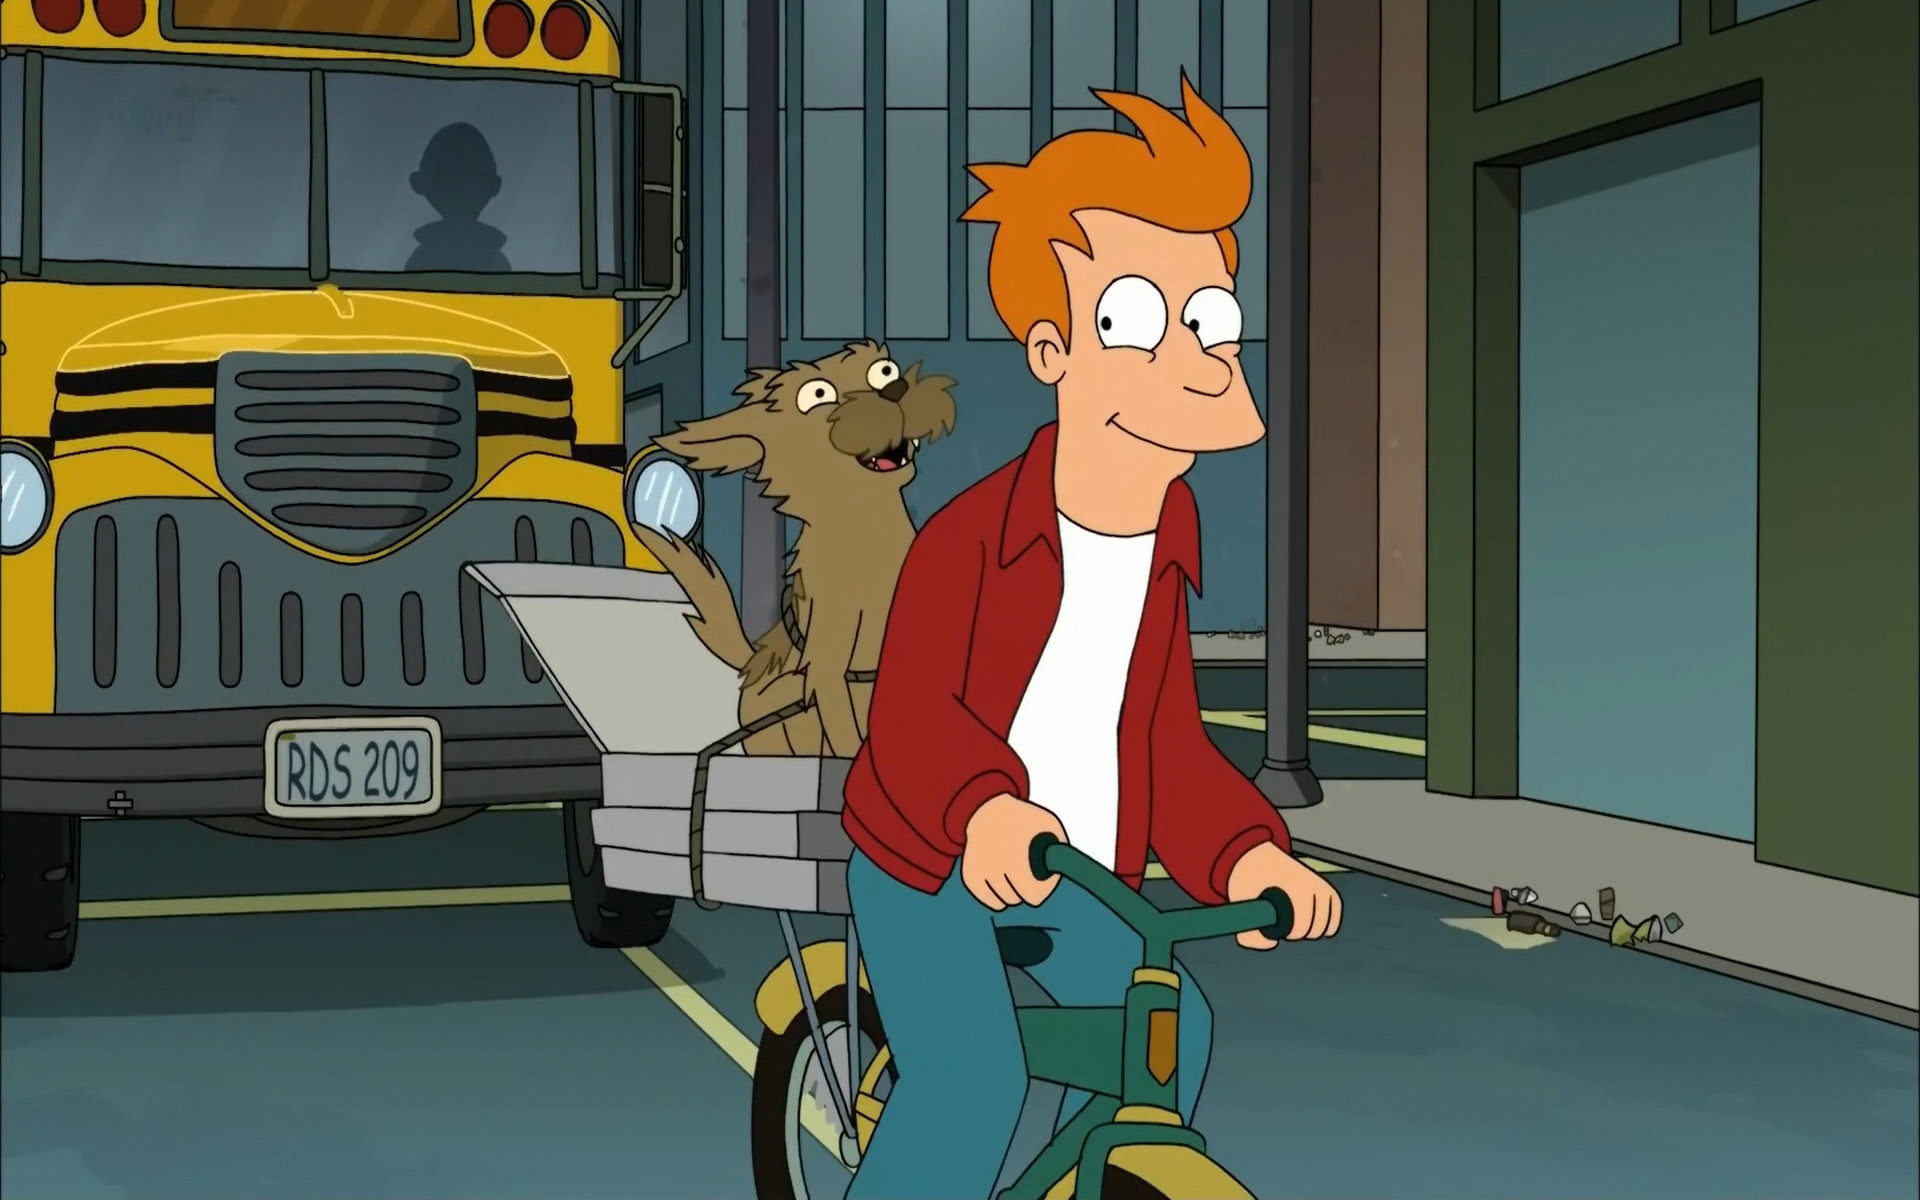 Fry, in his trademark red jacket and jeans, rides his bike on a busy street to deliver the pizzas strapped on the back. His small dog Seymour is secured atop the pizza boxes, smiling as they ride. 